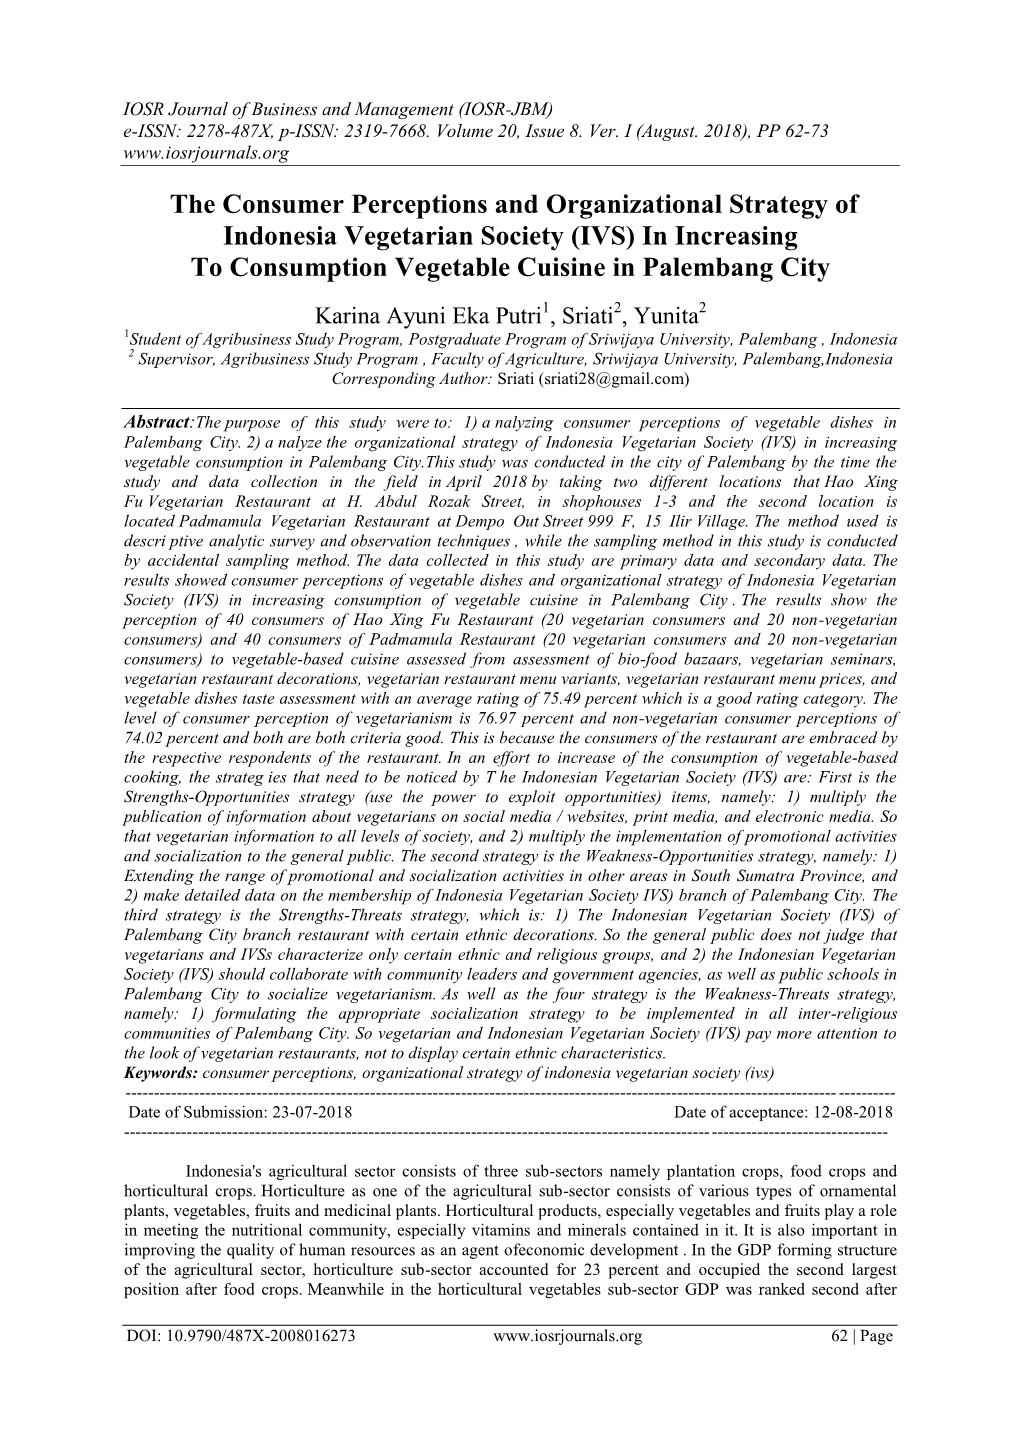 The Consumer Perceptions and Organizational Strategy of Indonesia Vegetarian Society (IVS) in Increasing to Consumption Vegetable Cuisine in Palembang City